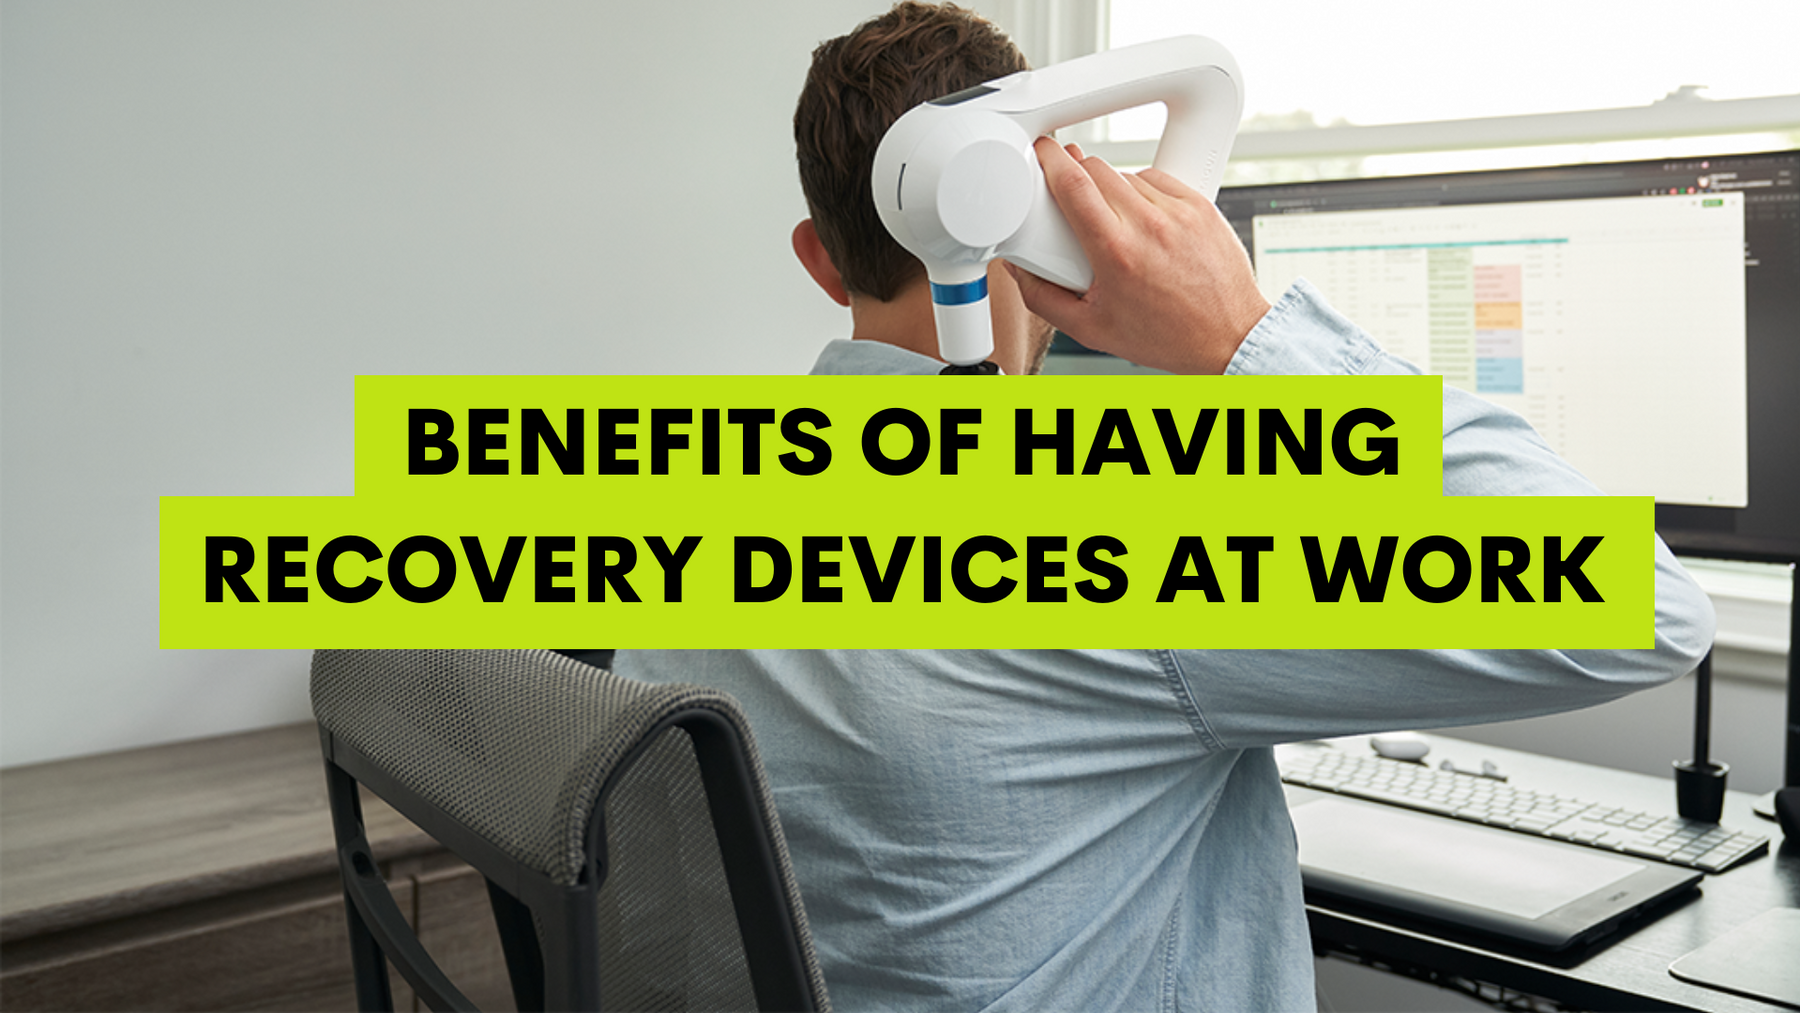 Benefits of Having Recovery Devices in the Office